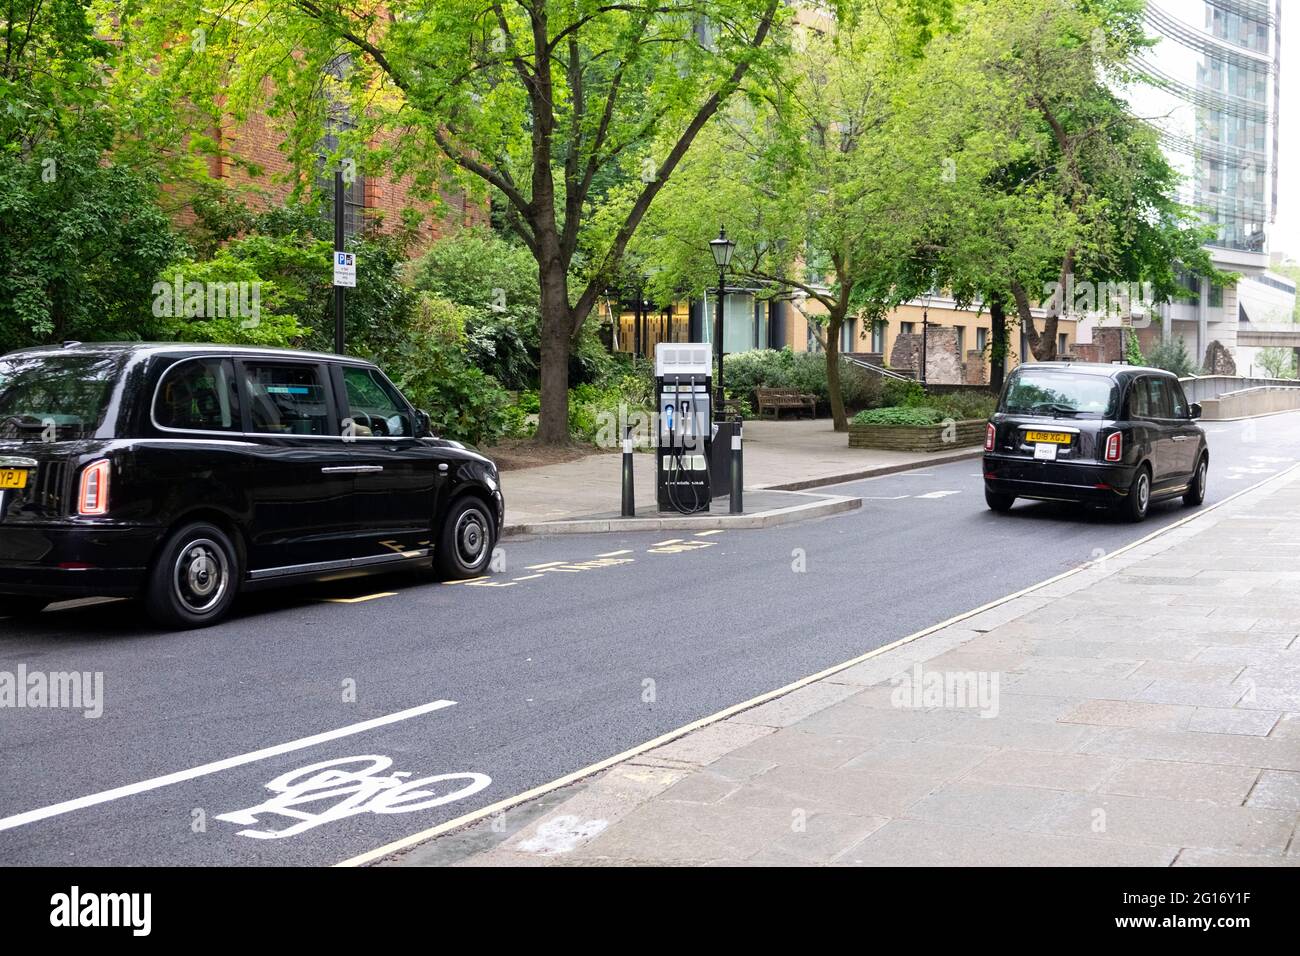 Black taxi cab recharging vehicle at an electric charging point in the City of London England UK  KATHY DEWITT Stock Photo